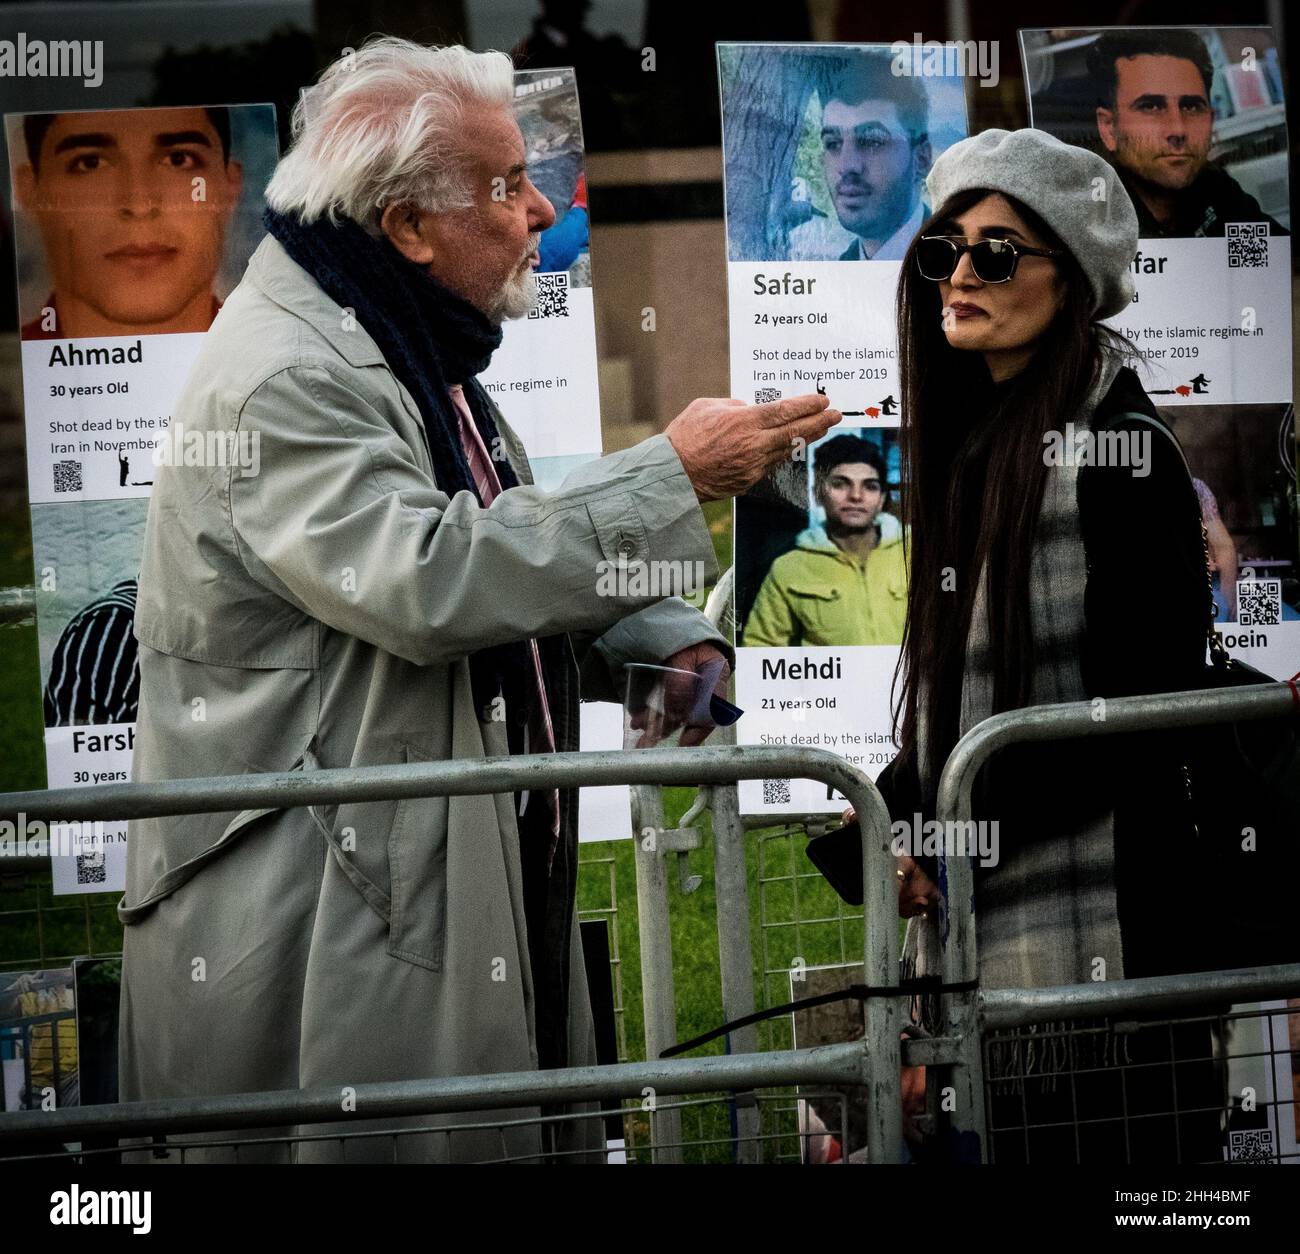 Suporters of the Iranian Royal family protest outside Westminser. Stock Photo